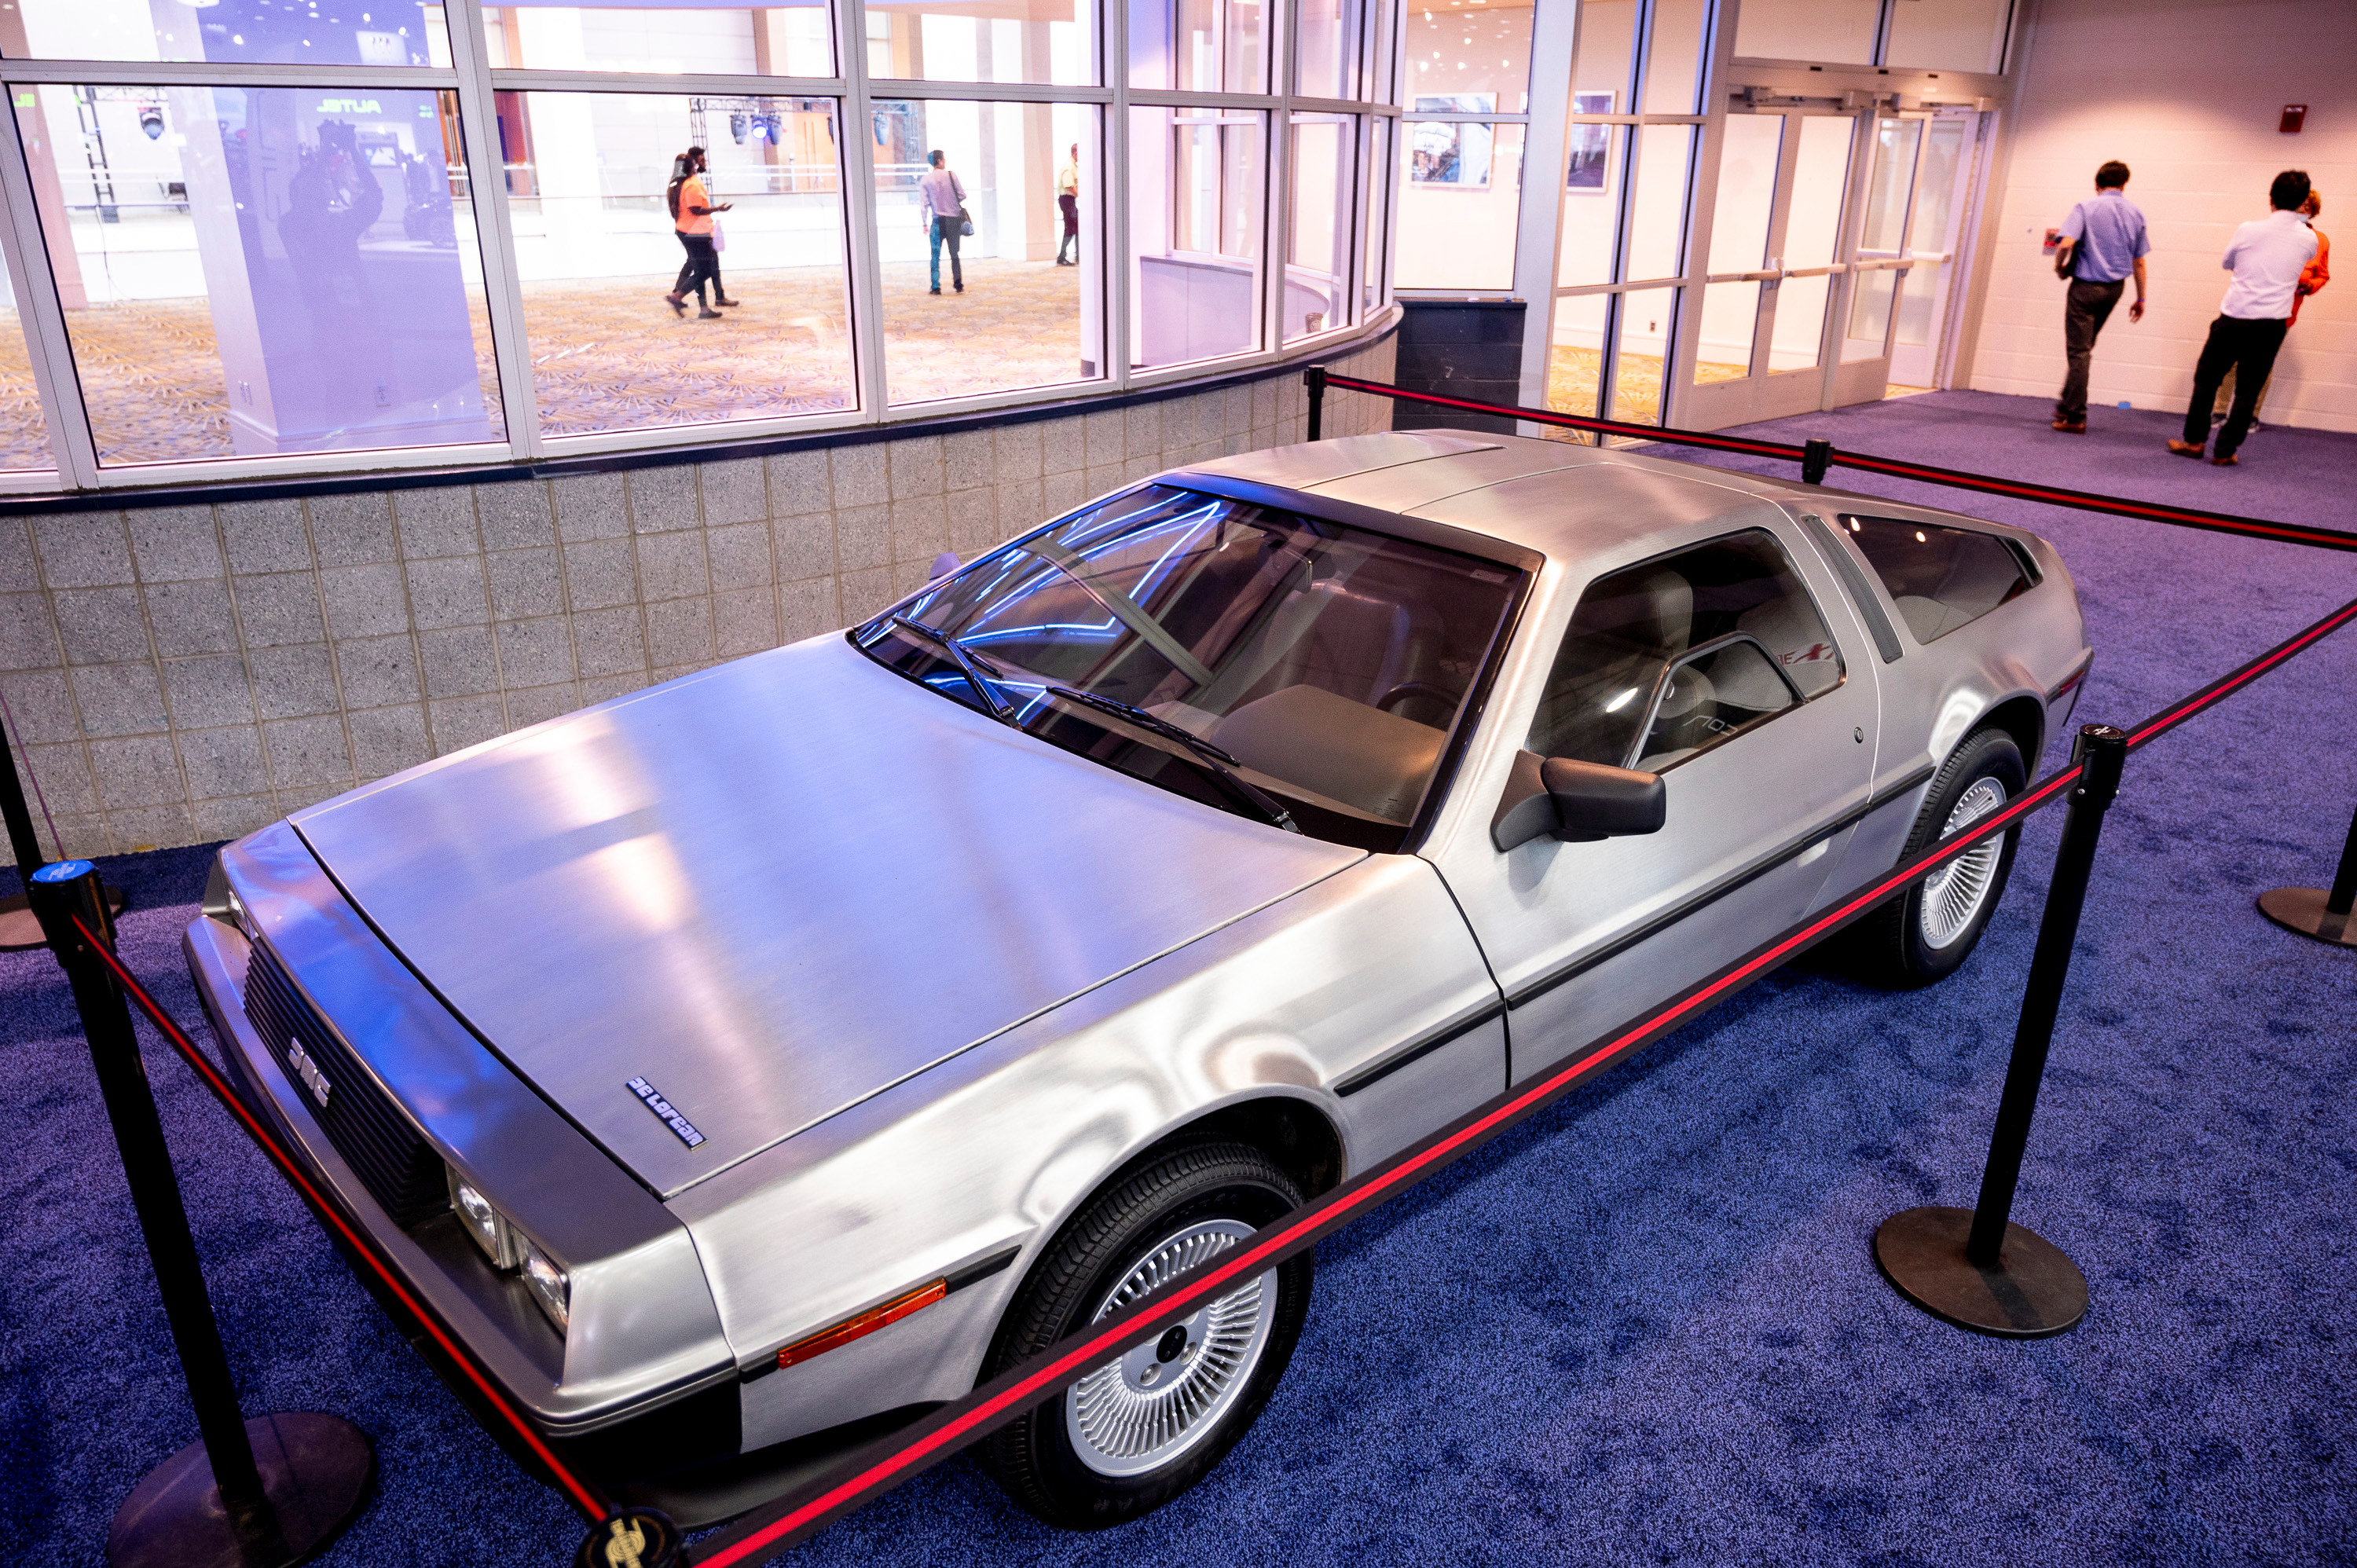 A DMC DeLorean on display during the 2022 North American International Auto Show at Huntington Place in Detroit on Wednesday, Sept. 14 2022.